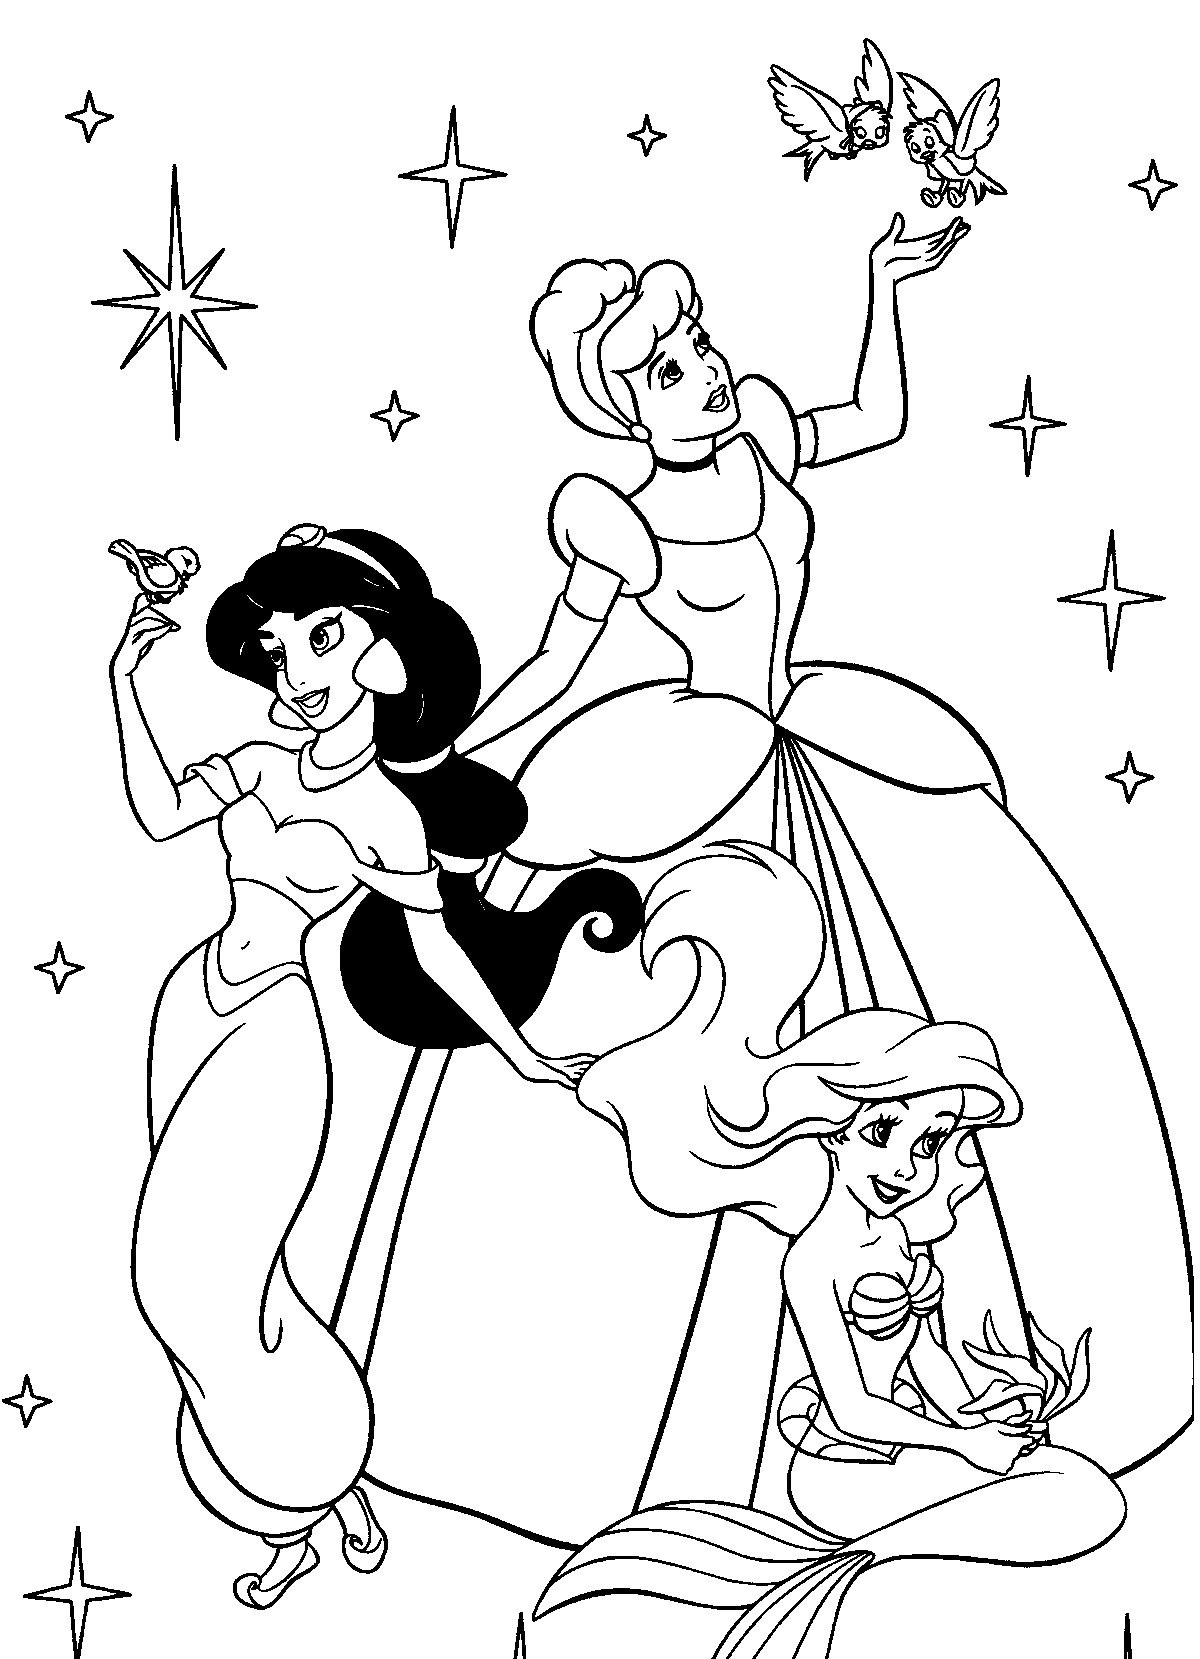 Coloring Sheets For Girls To Print Out
 coloring pages for girls disney free